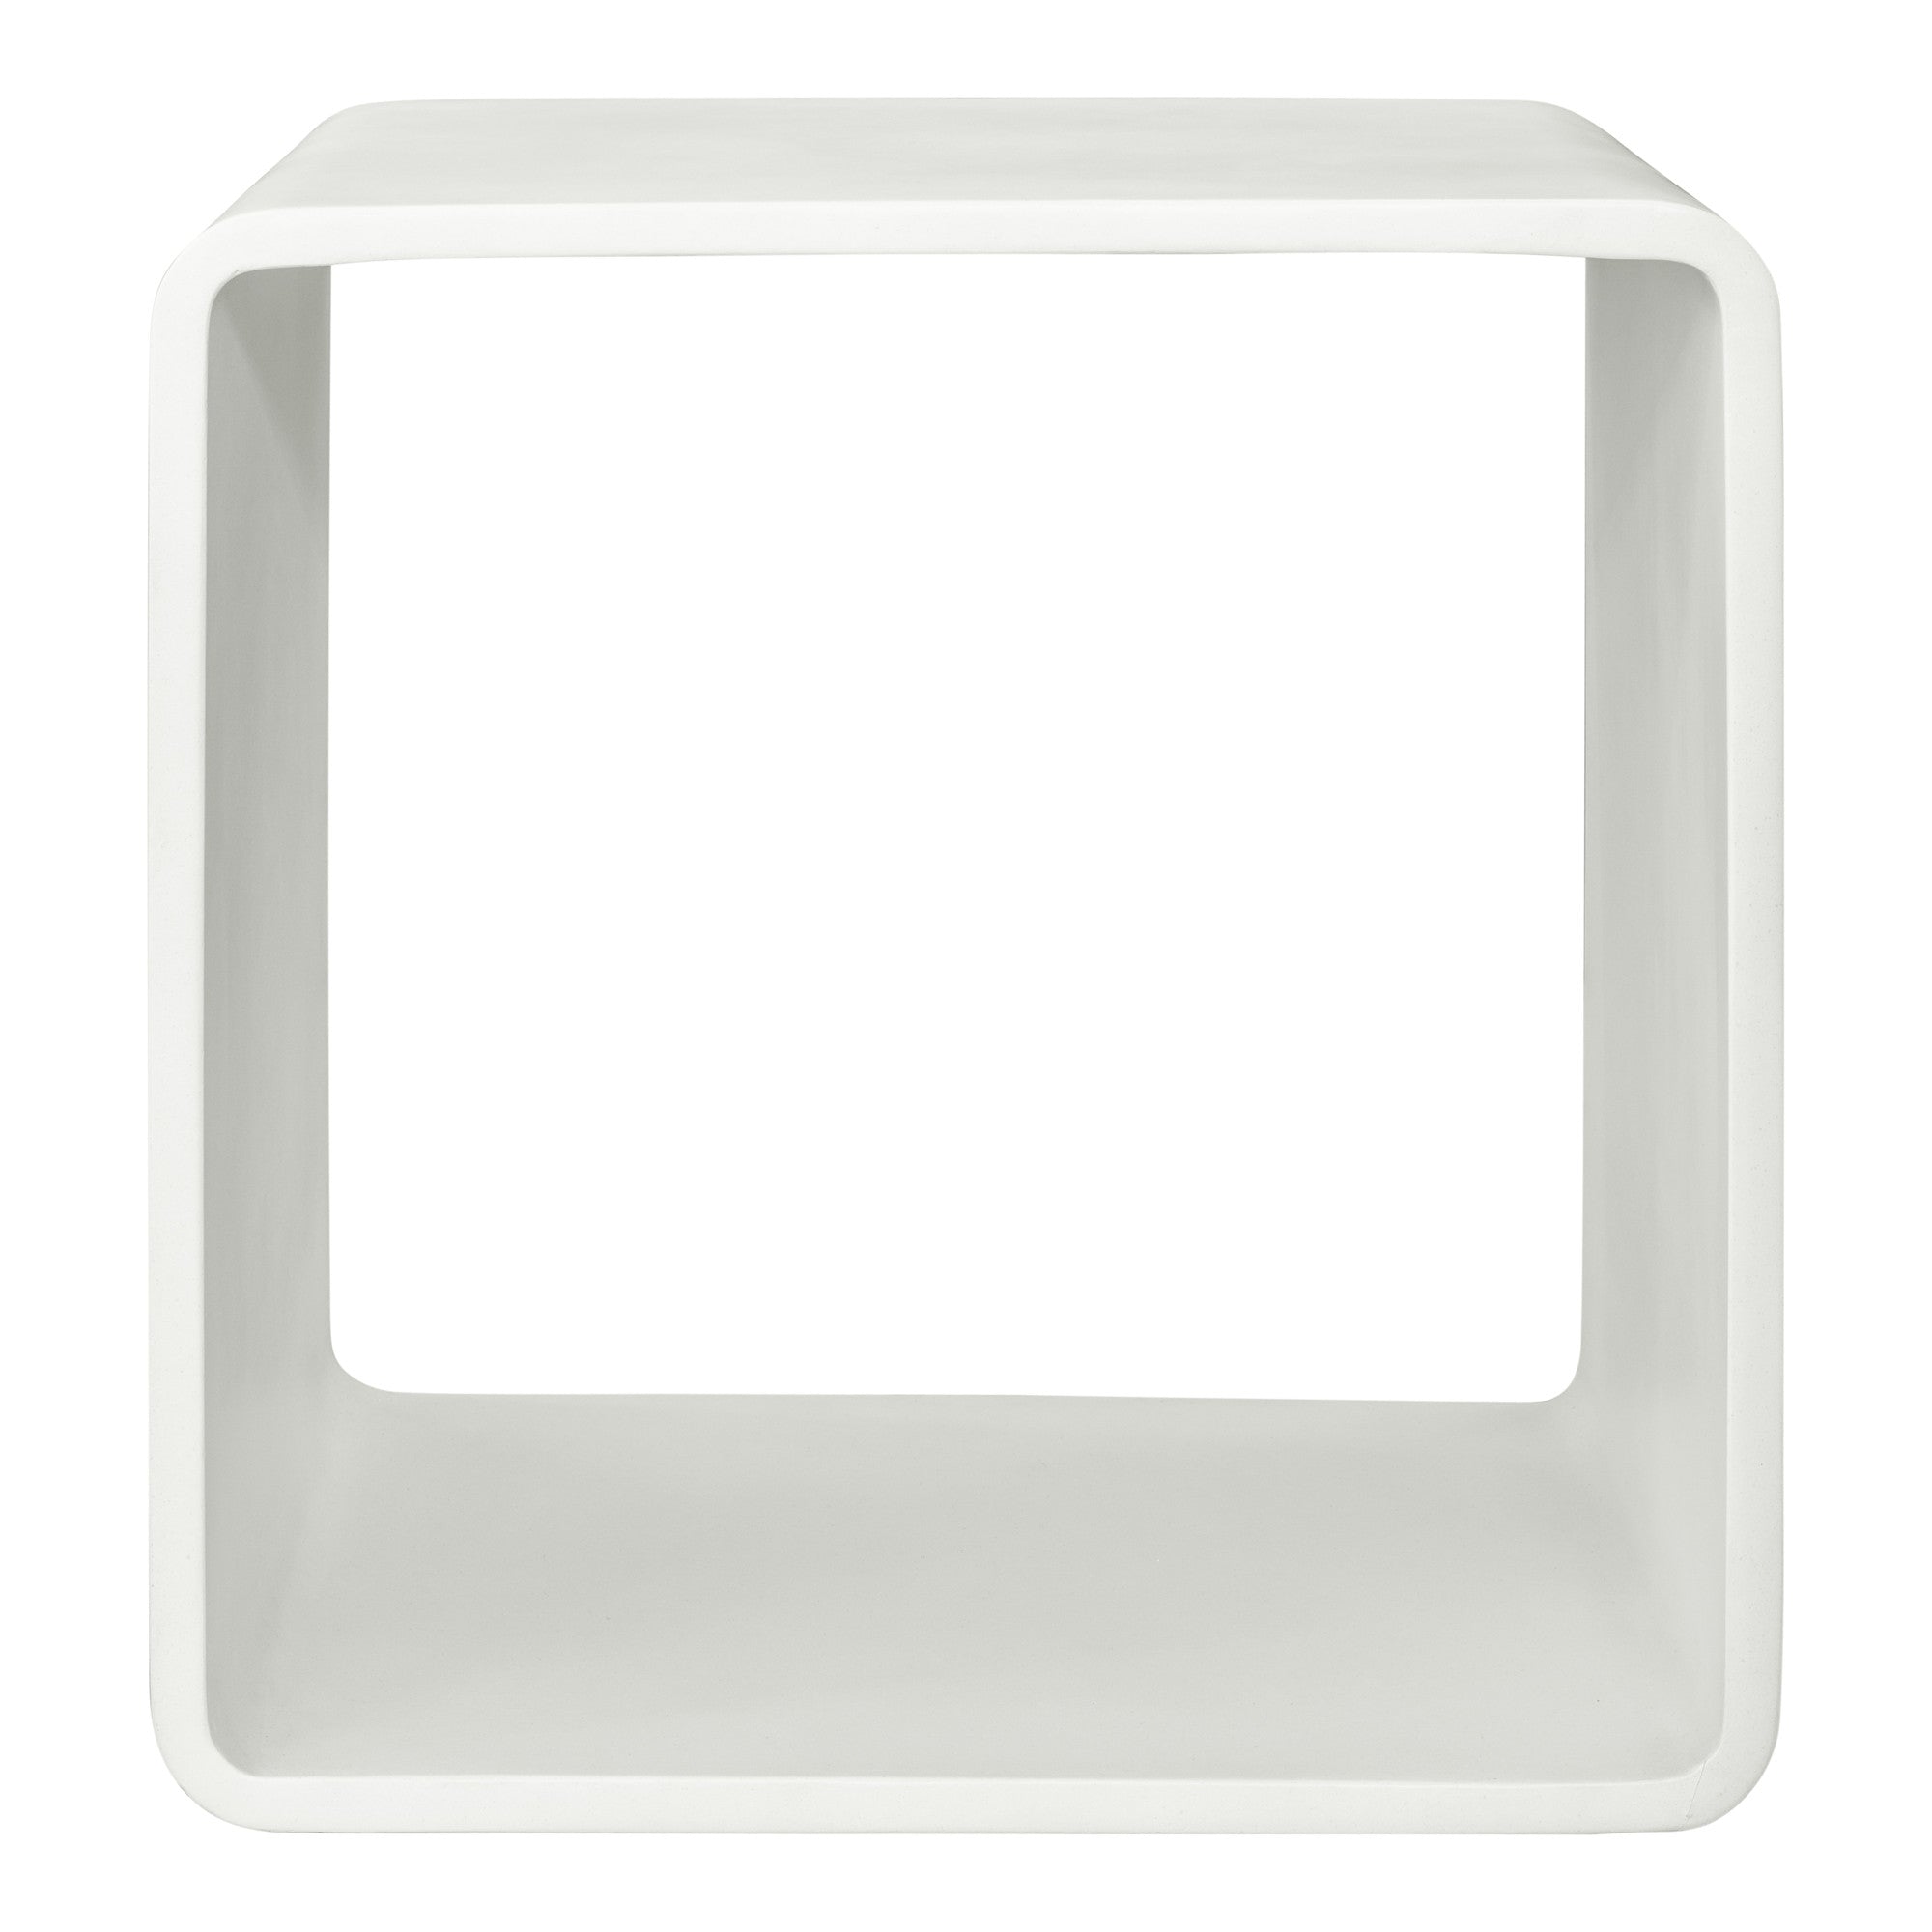 18" White Open Geo Cube Display Bookcase